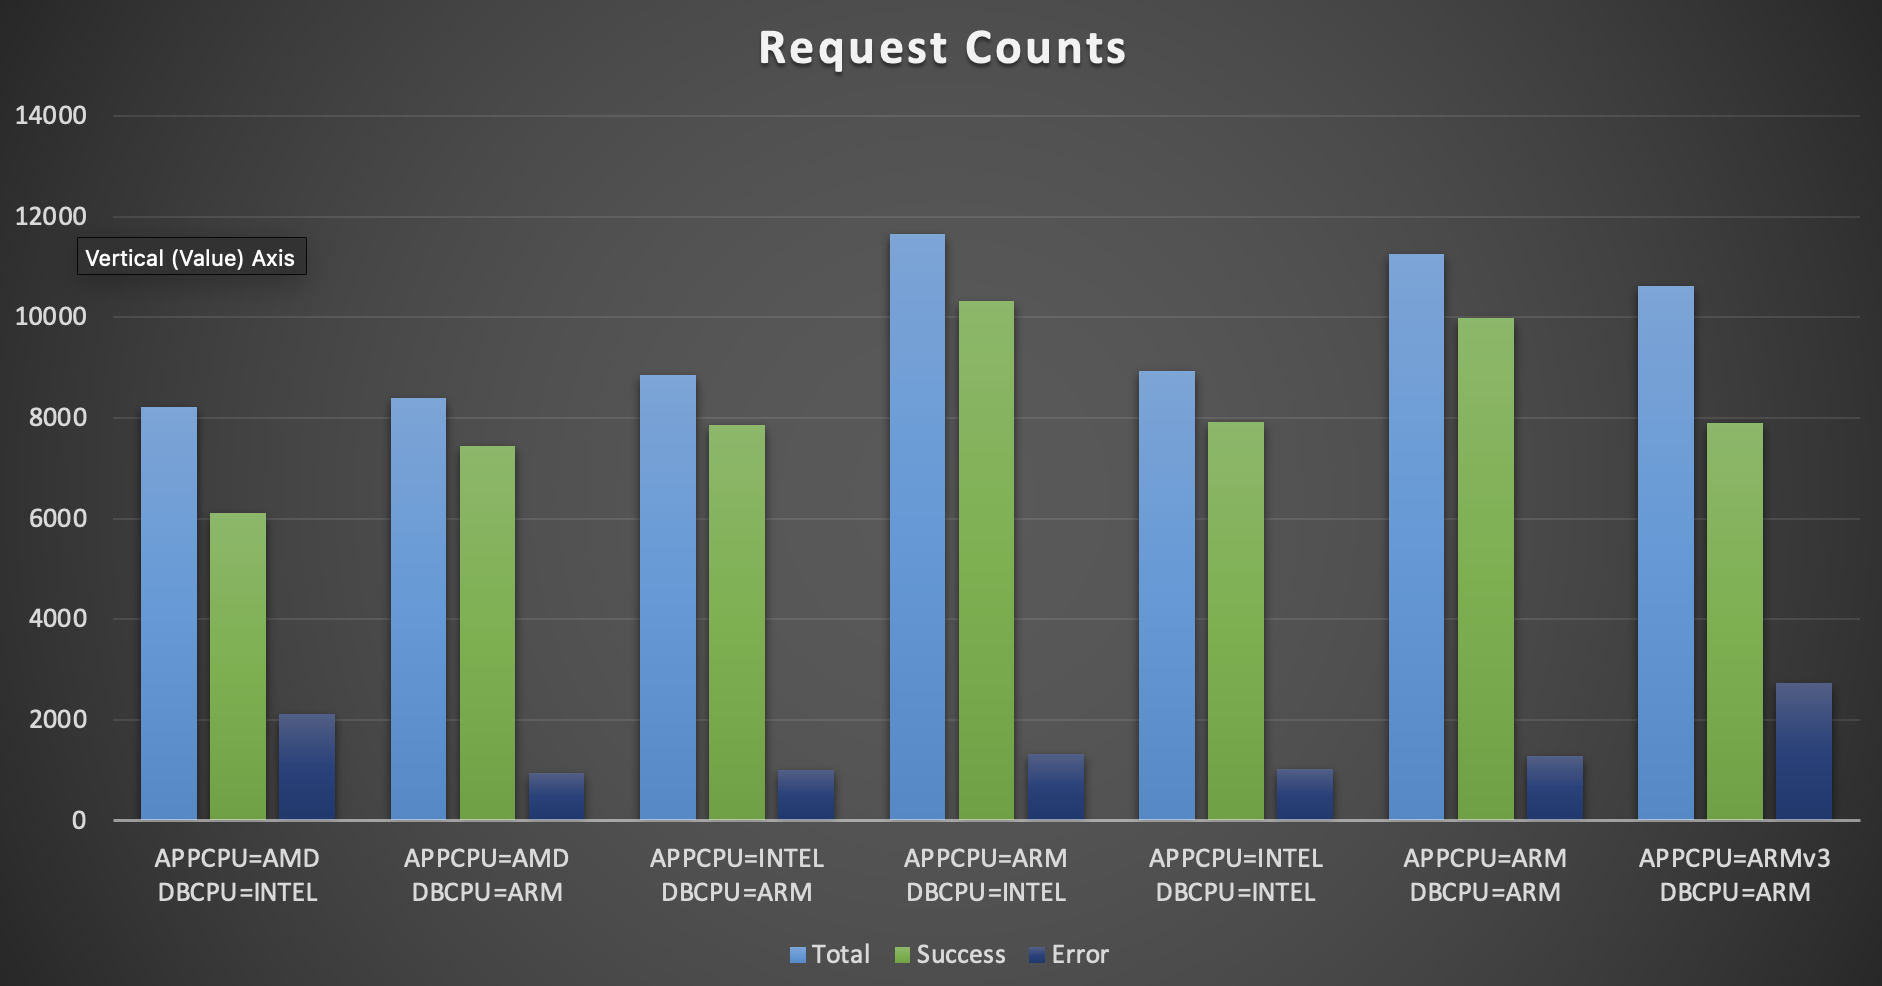 Request Counts